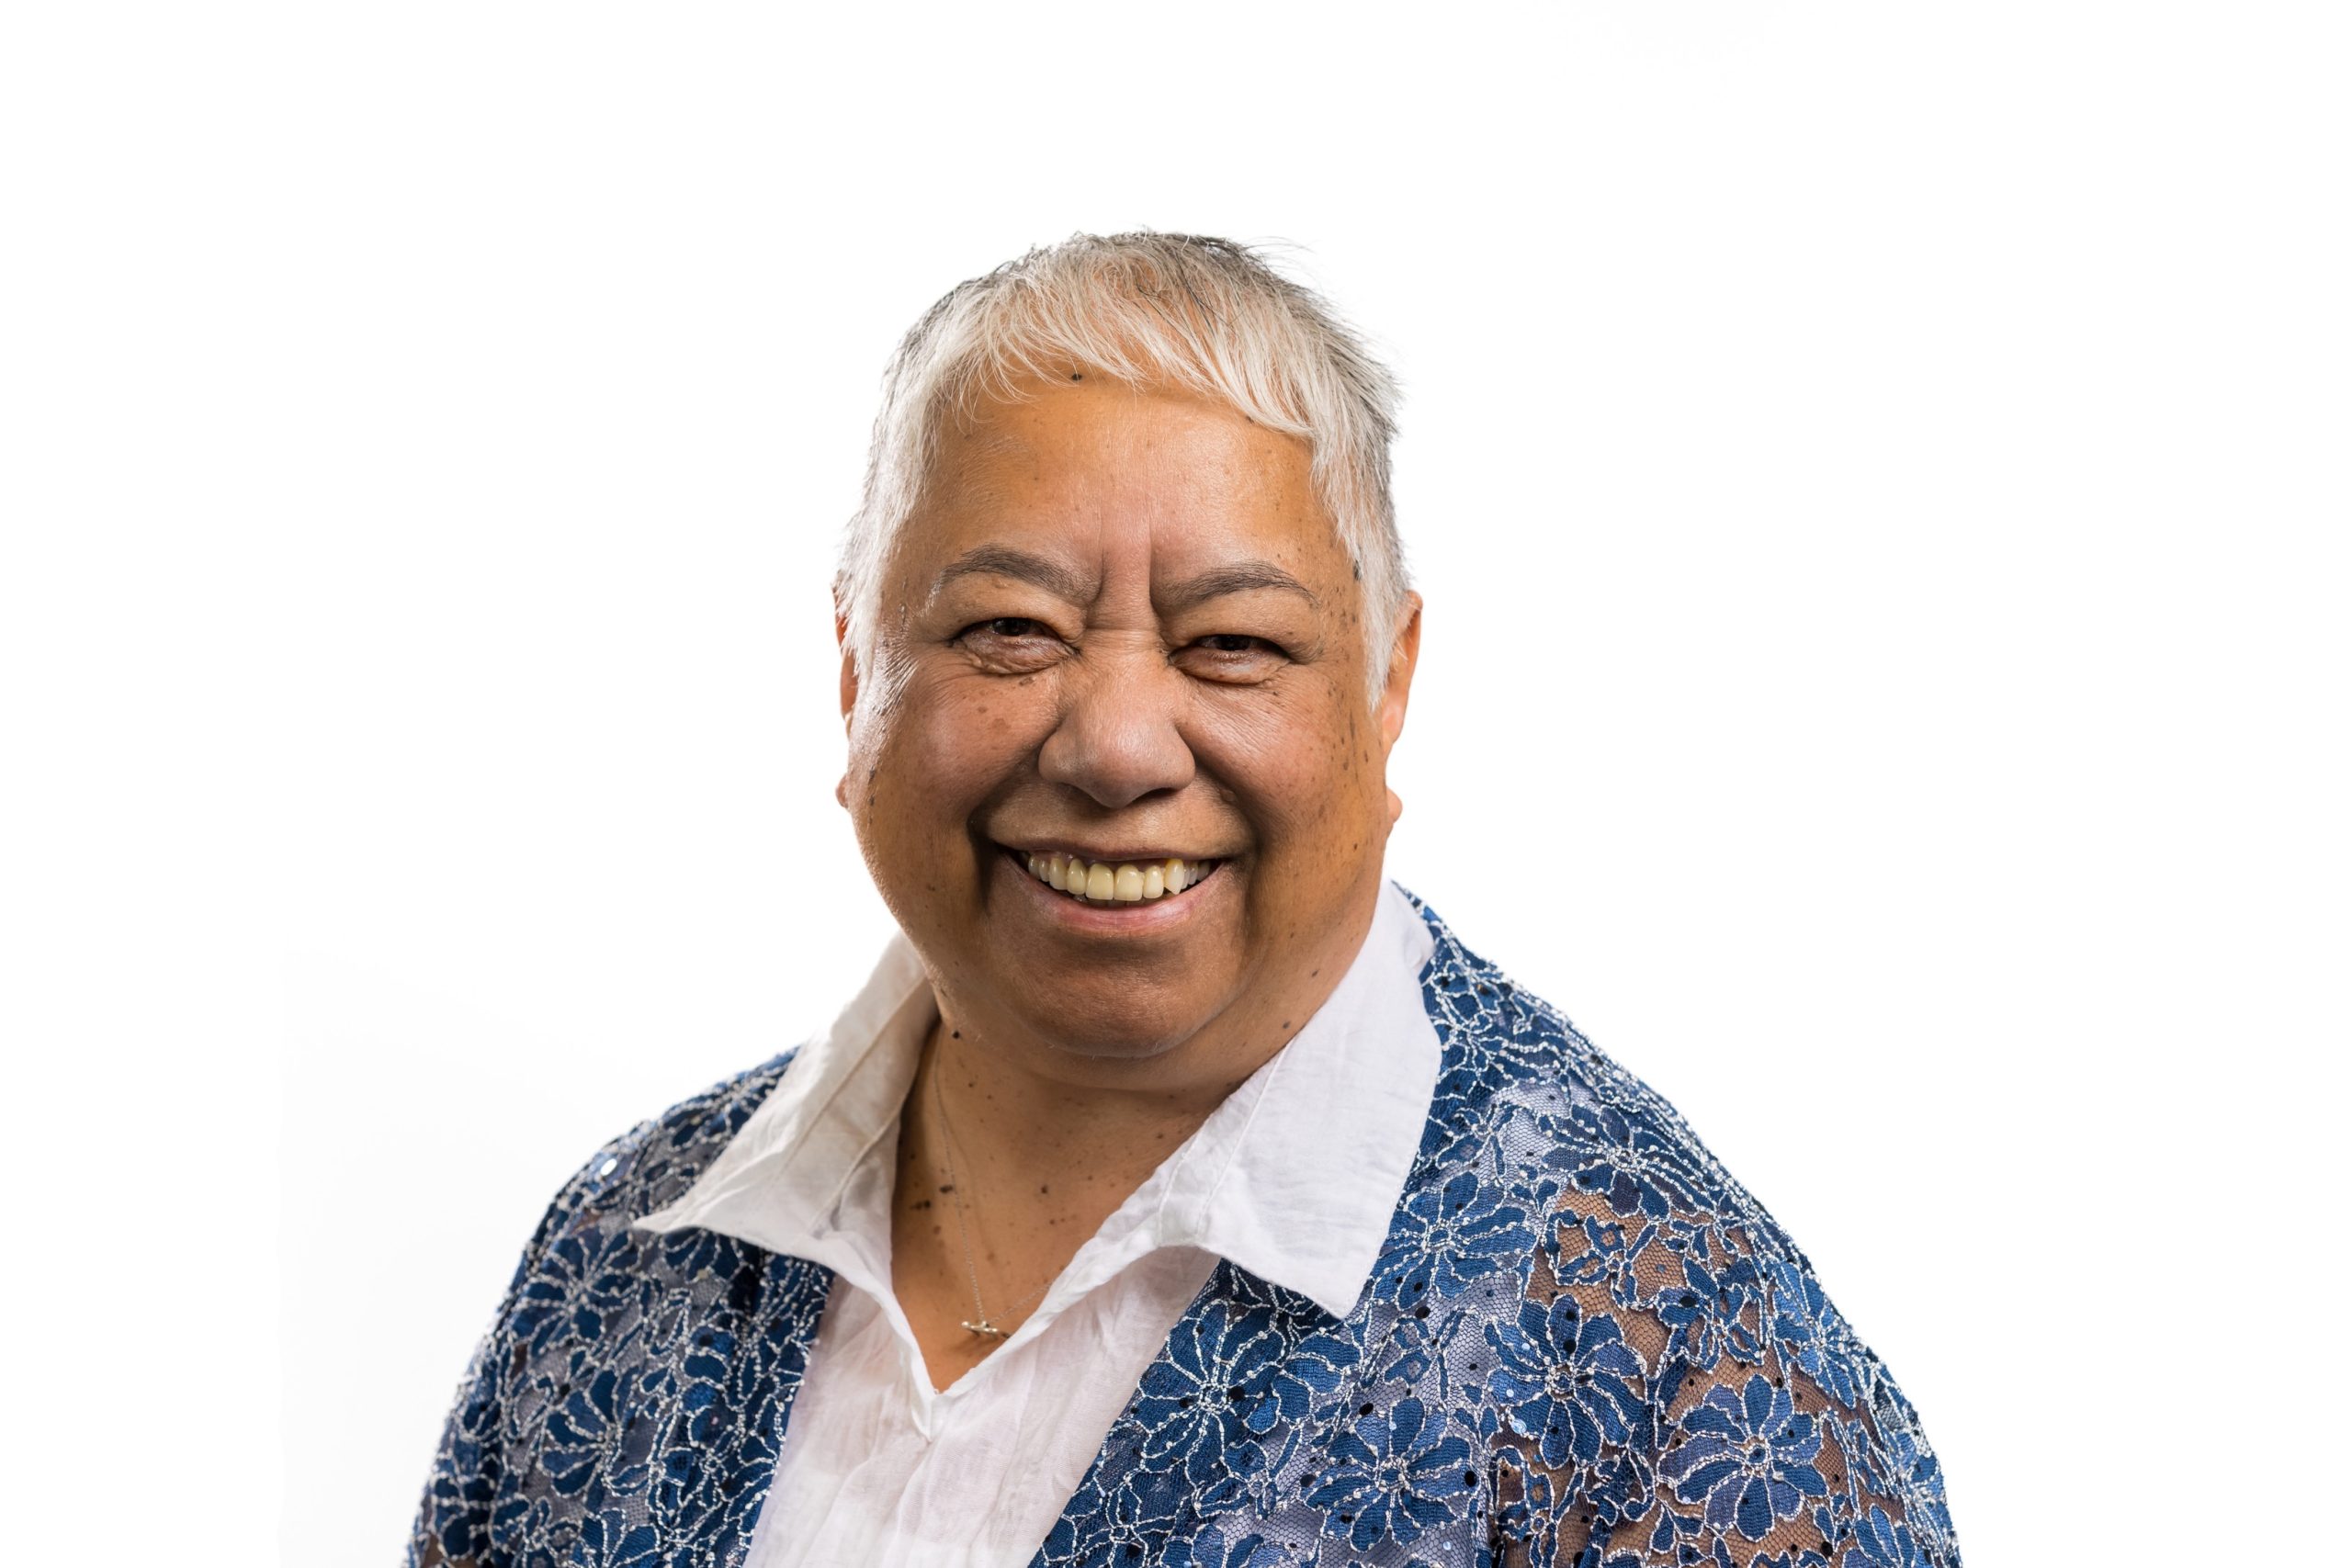 Board member Maggie Toko. Maggie is smiling at the camera and wearing a white shirt with a blue patterned cardigan.